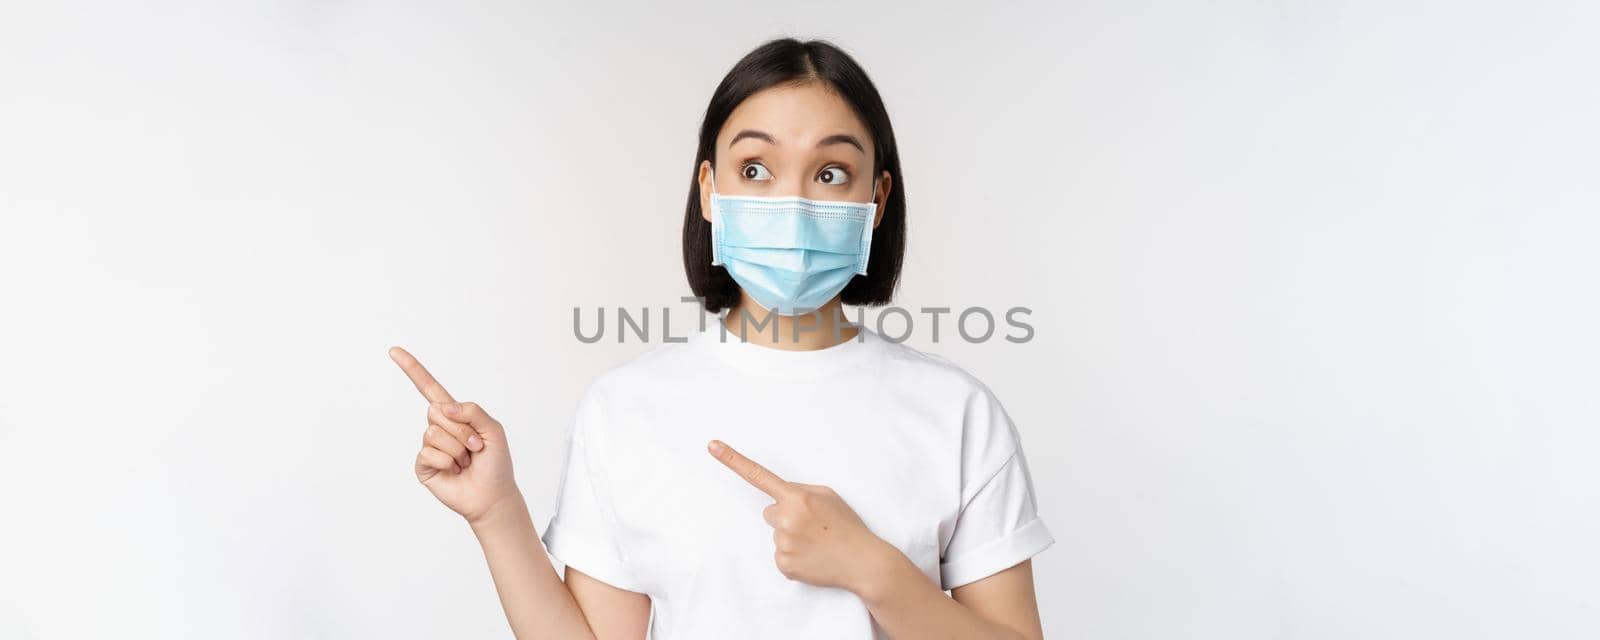 Young korean woman in medical face mask pointing fingers left and looking at logo, showing advertisement or banner, standing over white background.